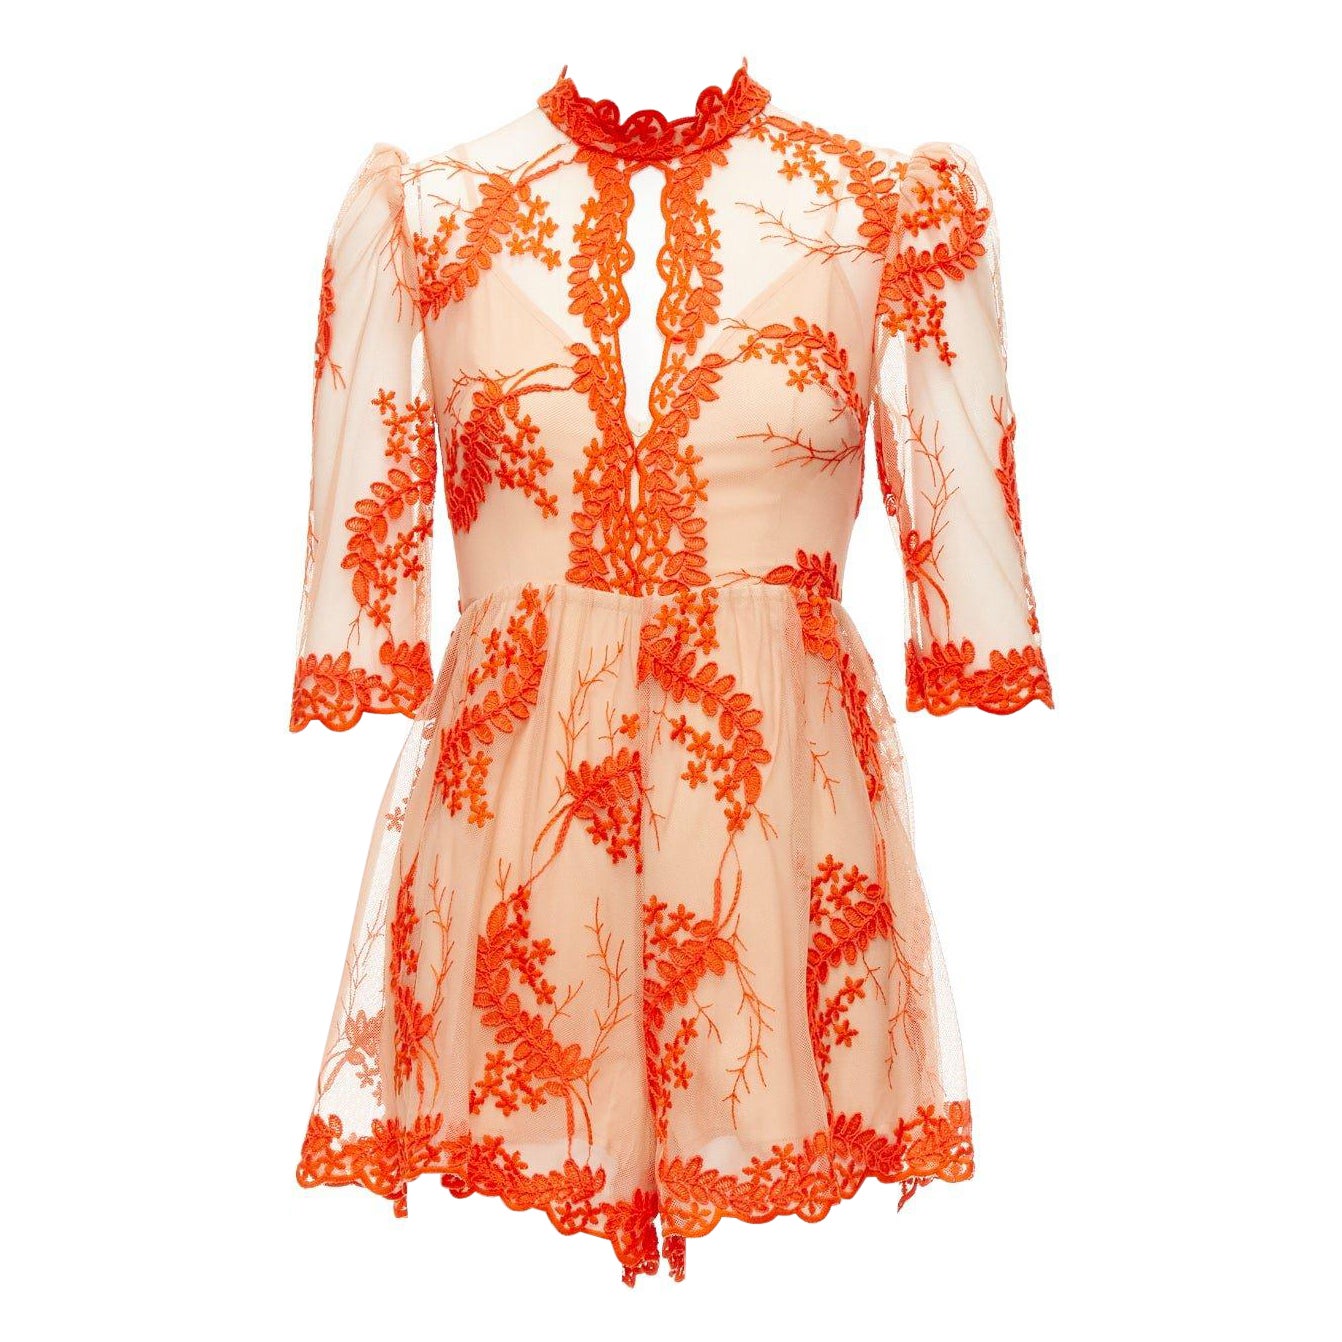 ALICE MCCALL Honeymoon orange lace nude sheer overlay lined romper US6 M For Sale